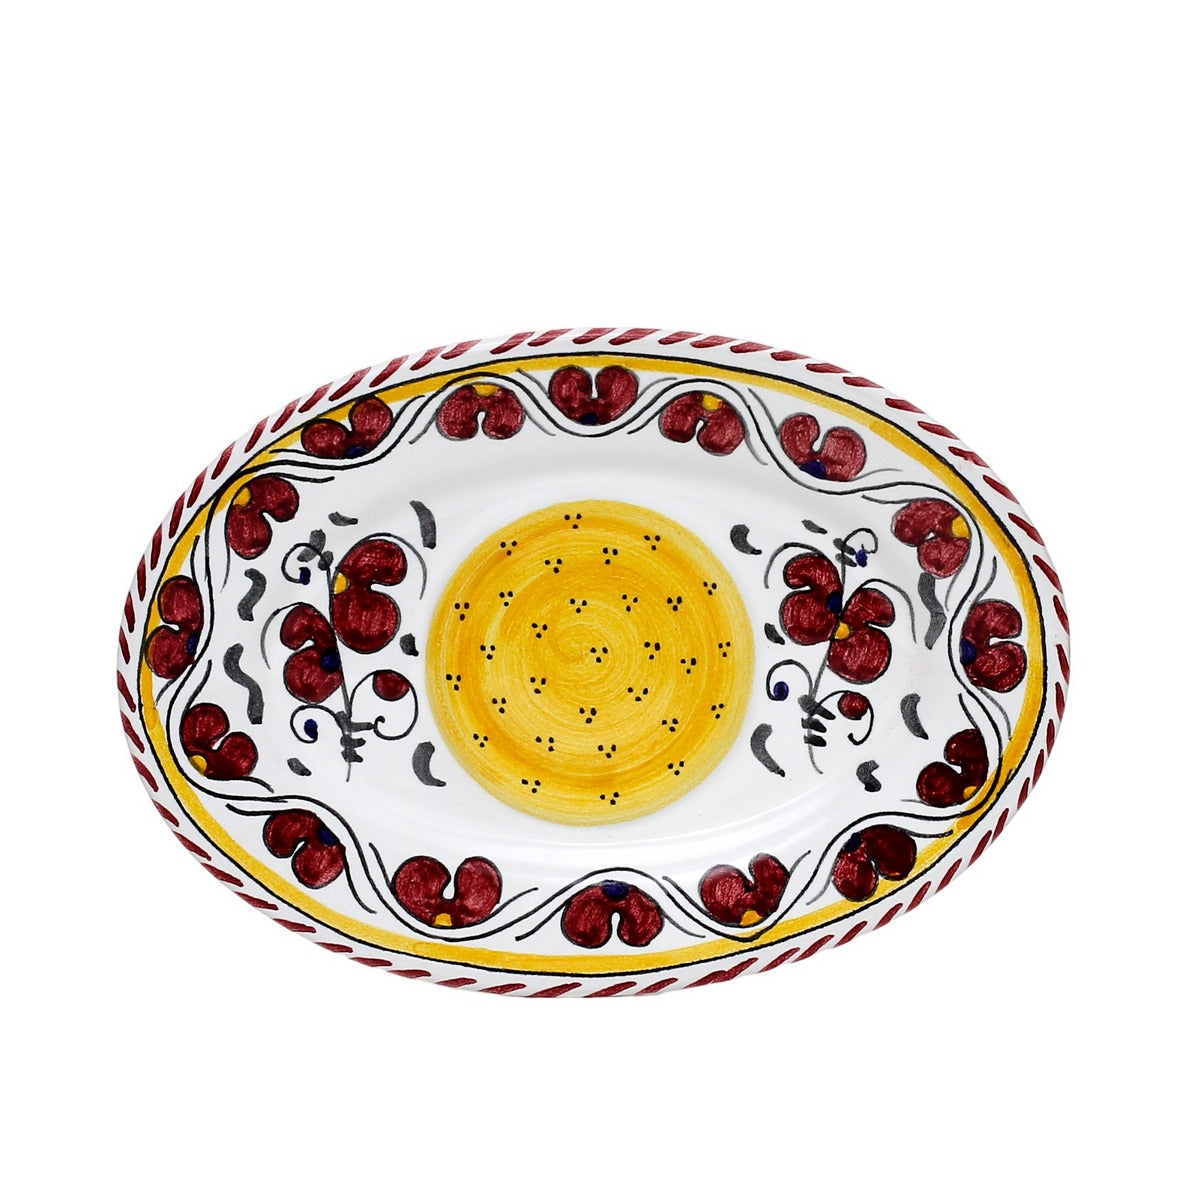 ORVIETO RED ROOSTER: Small Oval Plate - Artistica.com